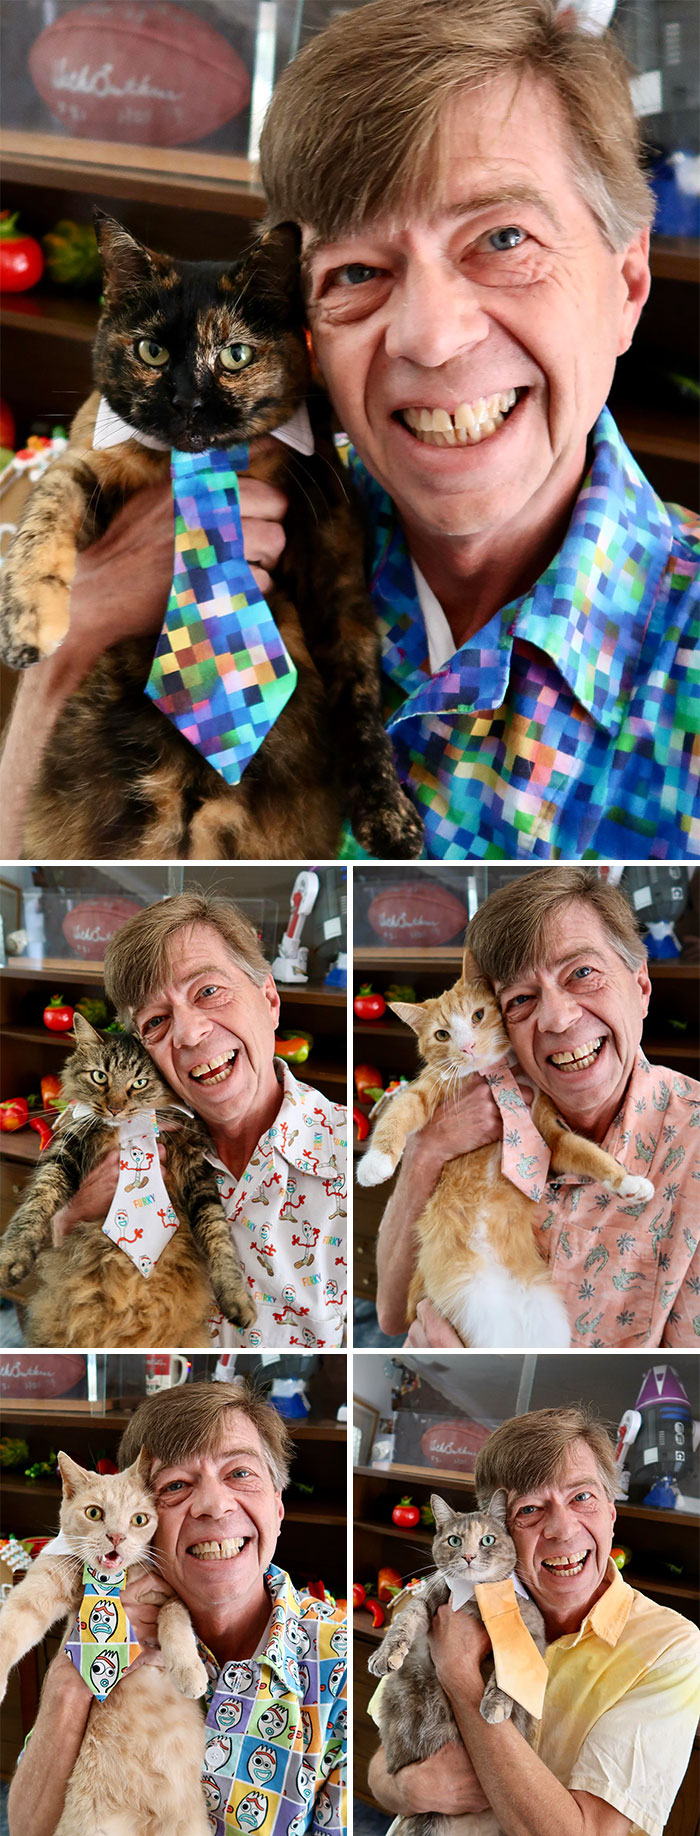 Been Sewing Shirts And Matching Ties For My 5 Cats. It’s Been Fun. Hope You Like Them